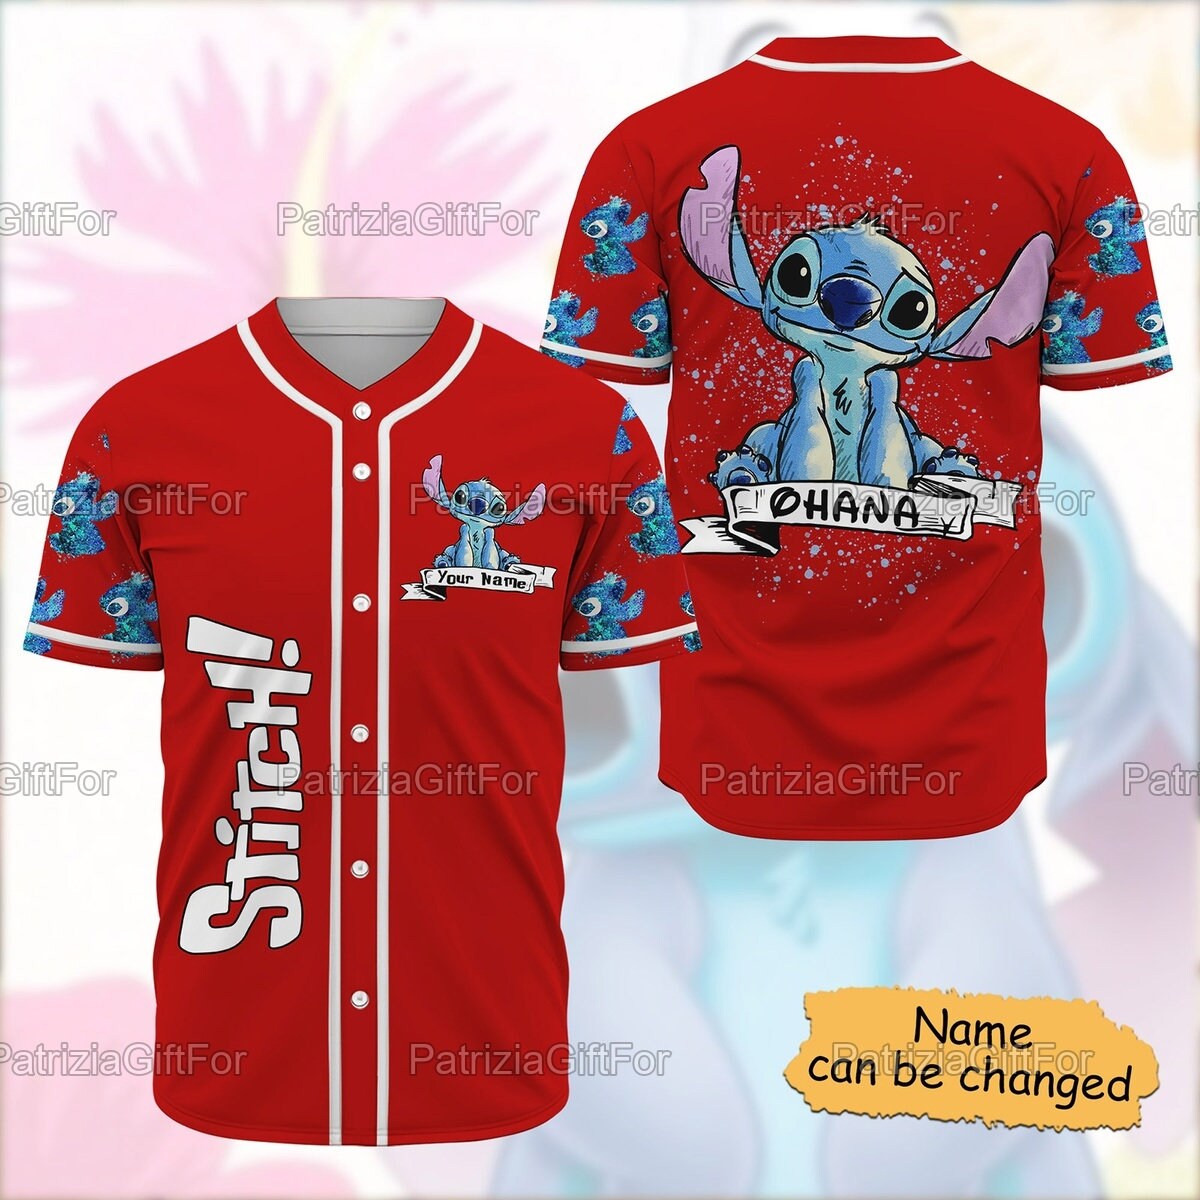 BLUE ANGELS YOUTH SUBLIMATED BASEBALL JERSEY